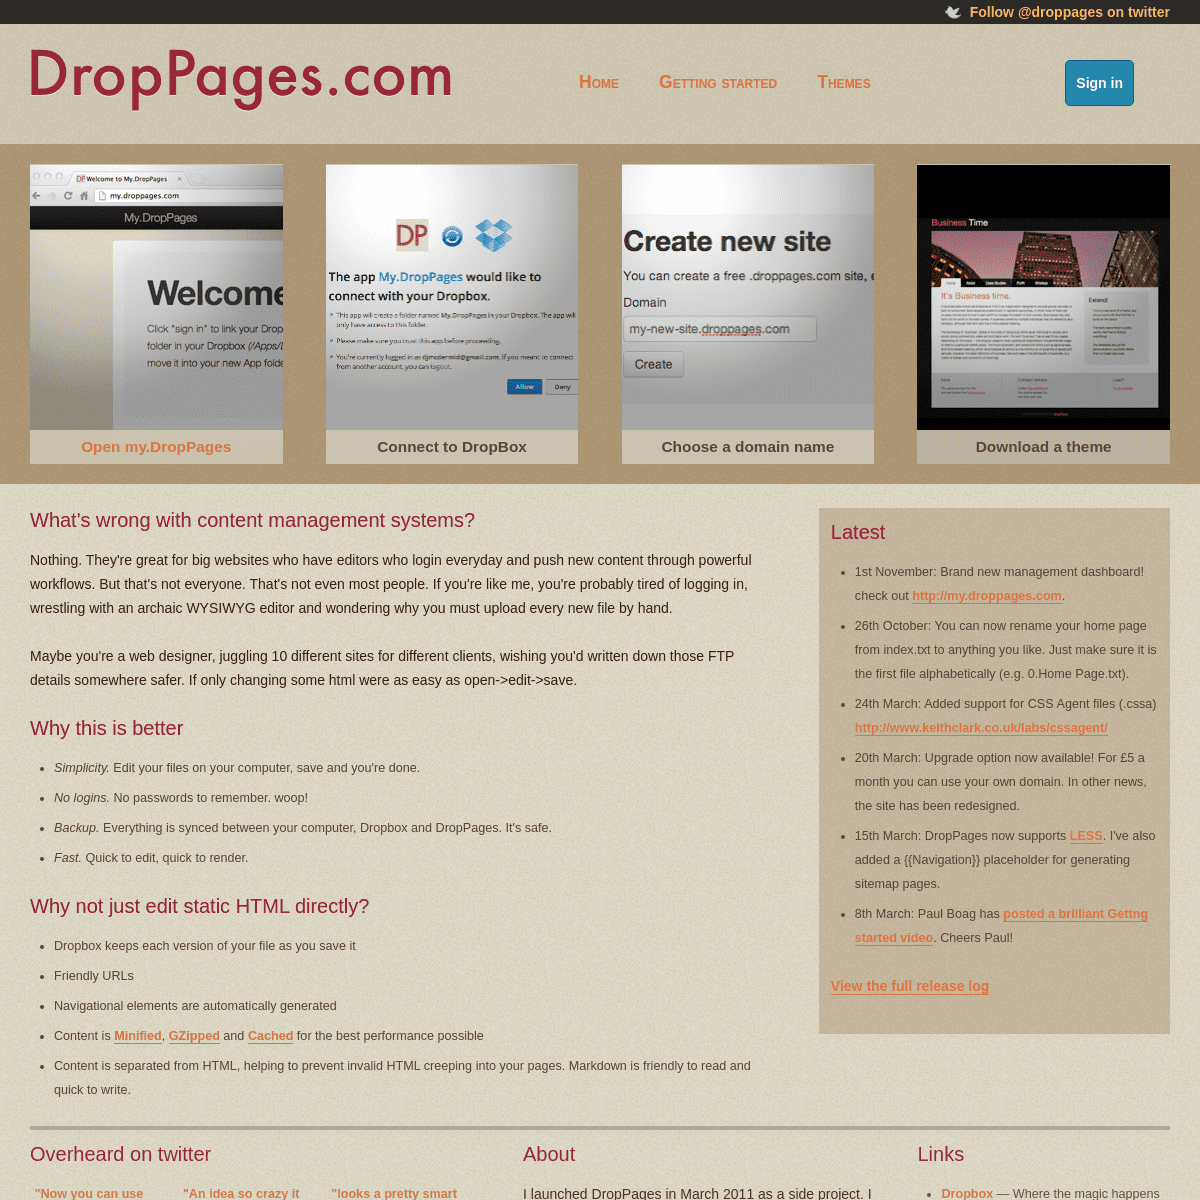 A complete backup of droppages.com